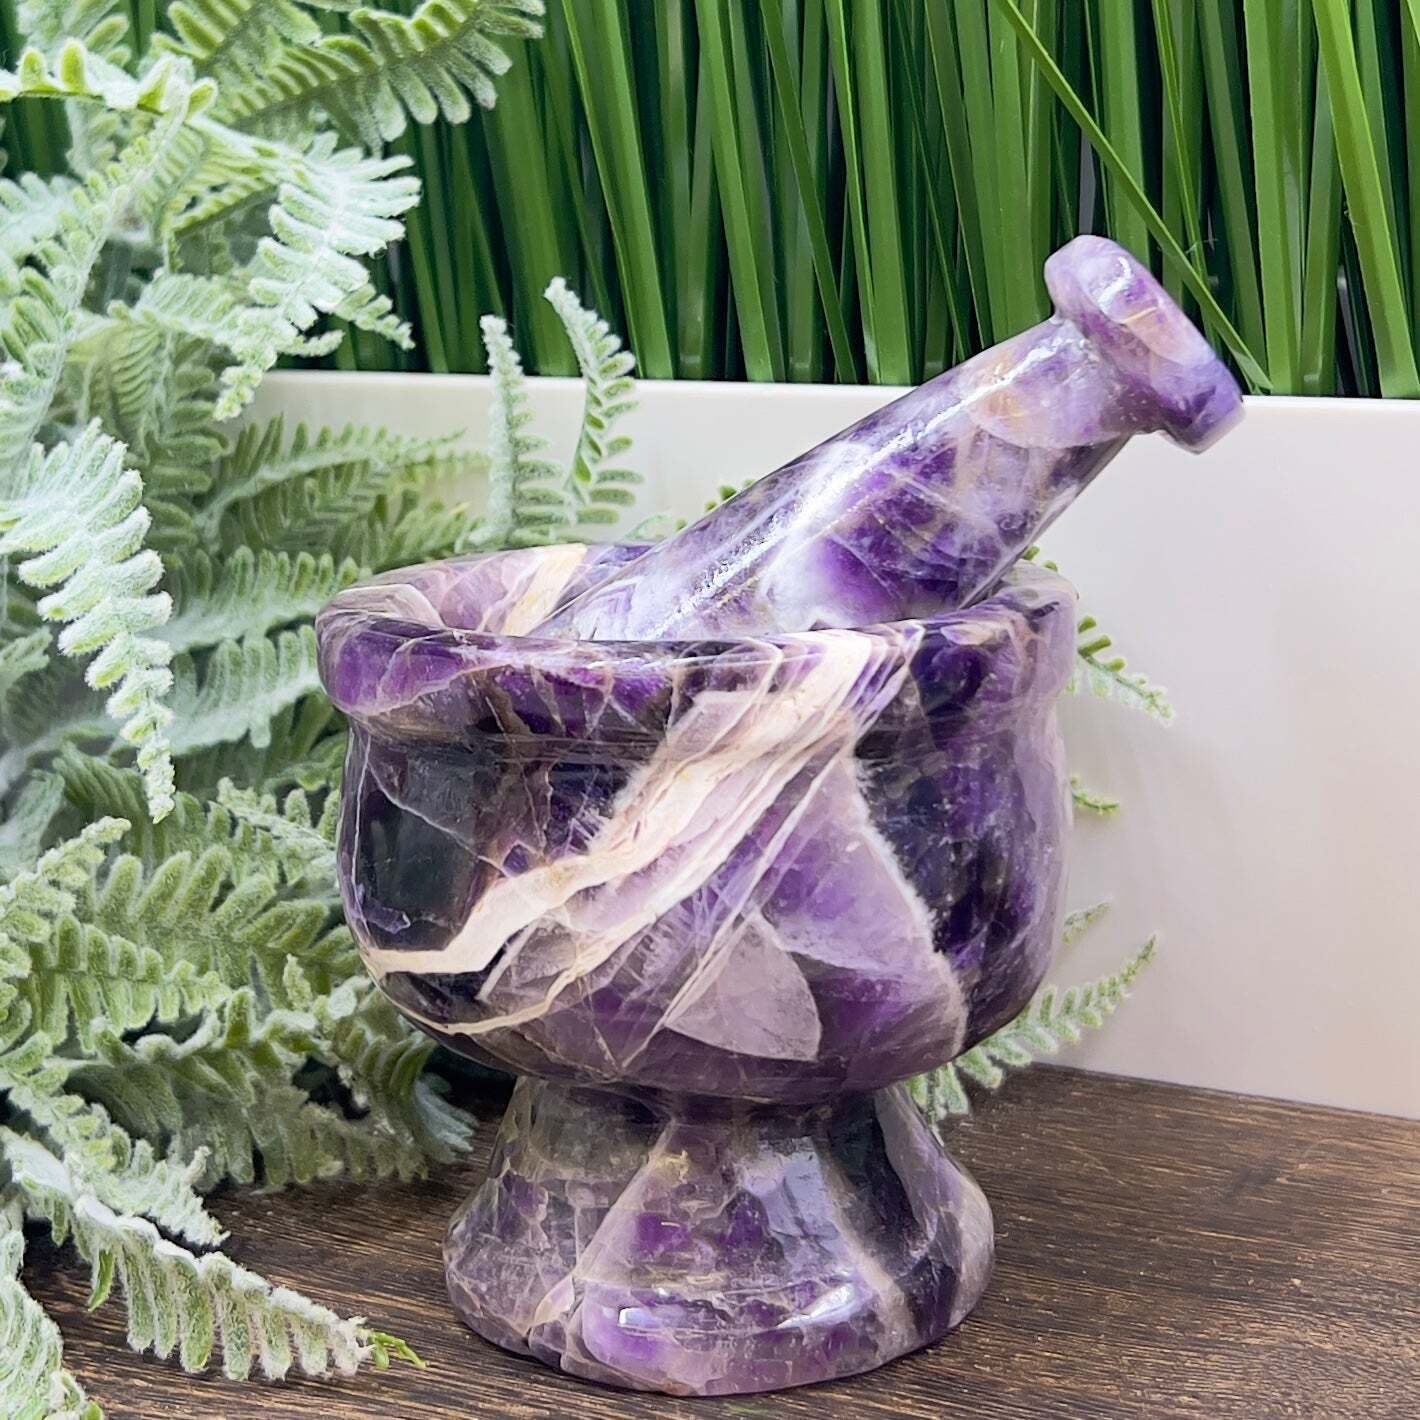 Chevron Dream Amethyst Mortar and Pestle Crystal Kitchen Carving 792g